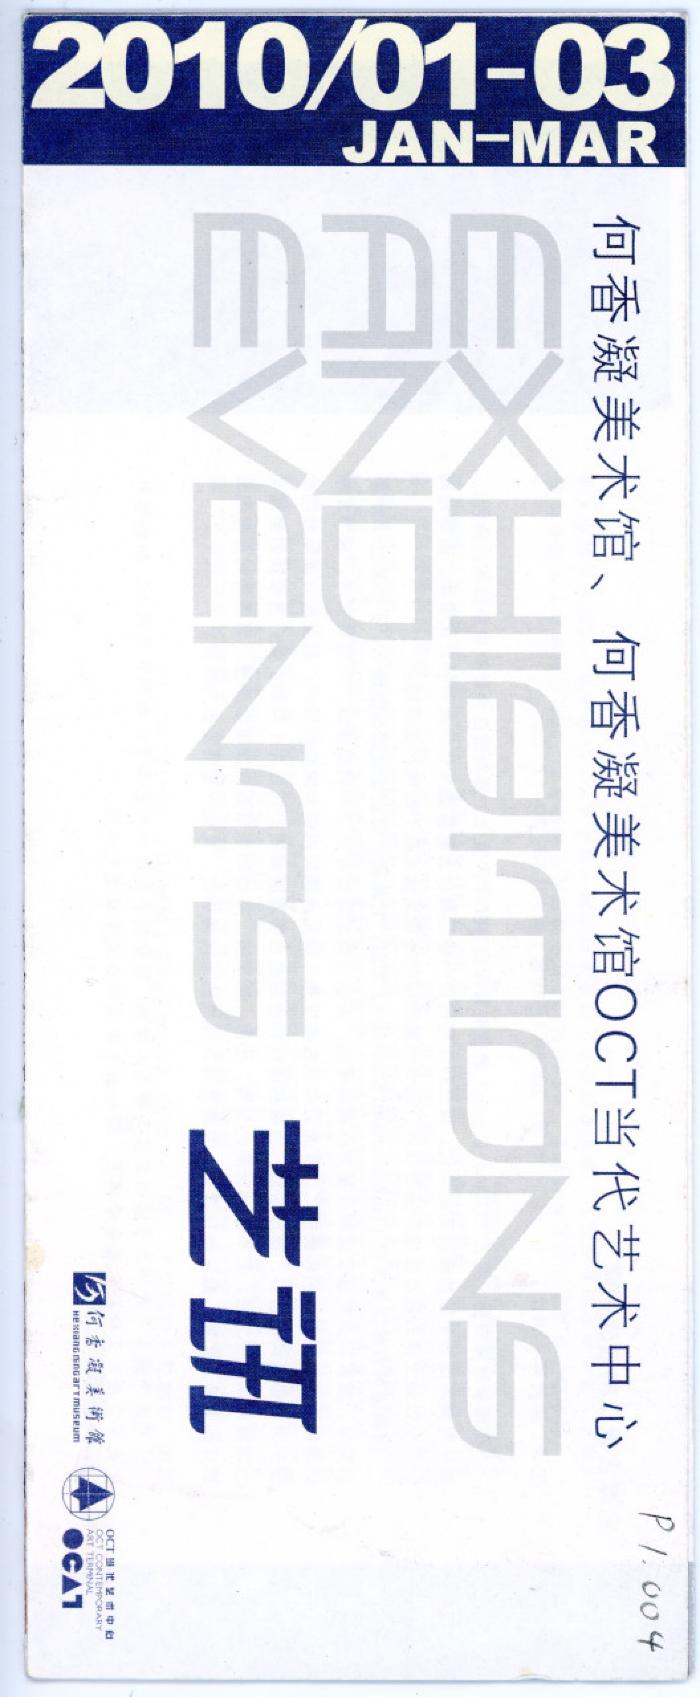 Exhibitions and Events 2010/01-03 (leaflet) / Shenzhen: Hexiang Ning Art Museum : 2010